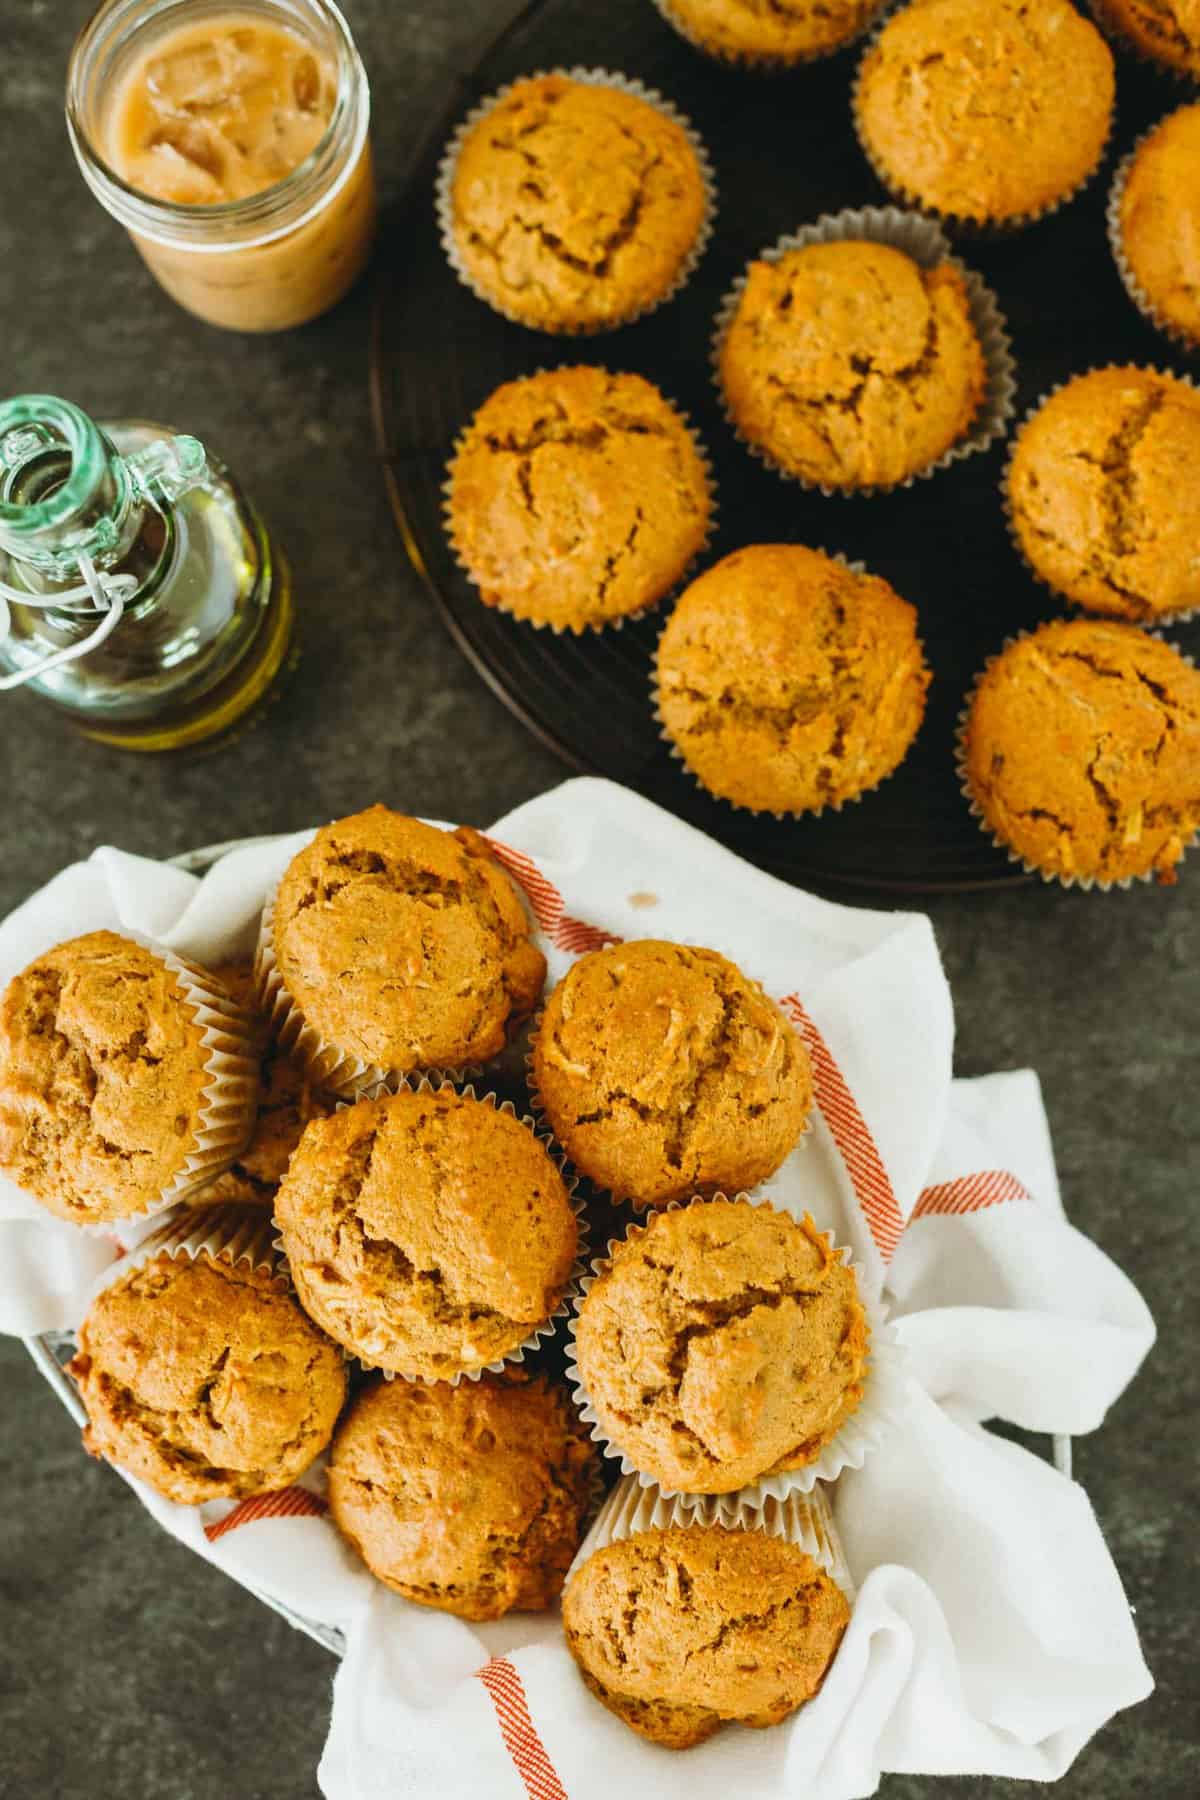 Soft and tender pumpkin apple olive oil muffins are the perfect muffins to make for Fall! The robust olive oil with the fresh apples make for a delicious flavor combination! #pumpkinrecipes #applerecipes #pumpkinapple #pumpkin #muffinrecipe #fallflavor